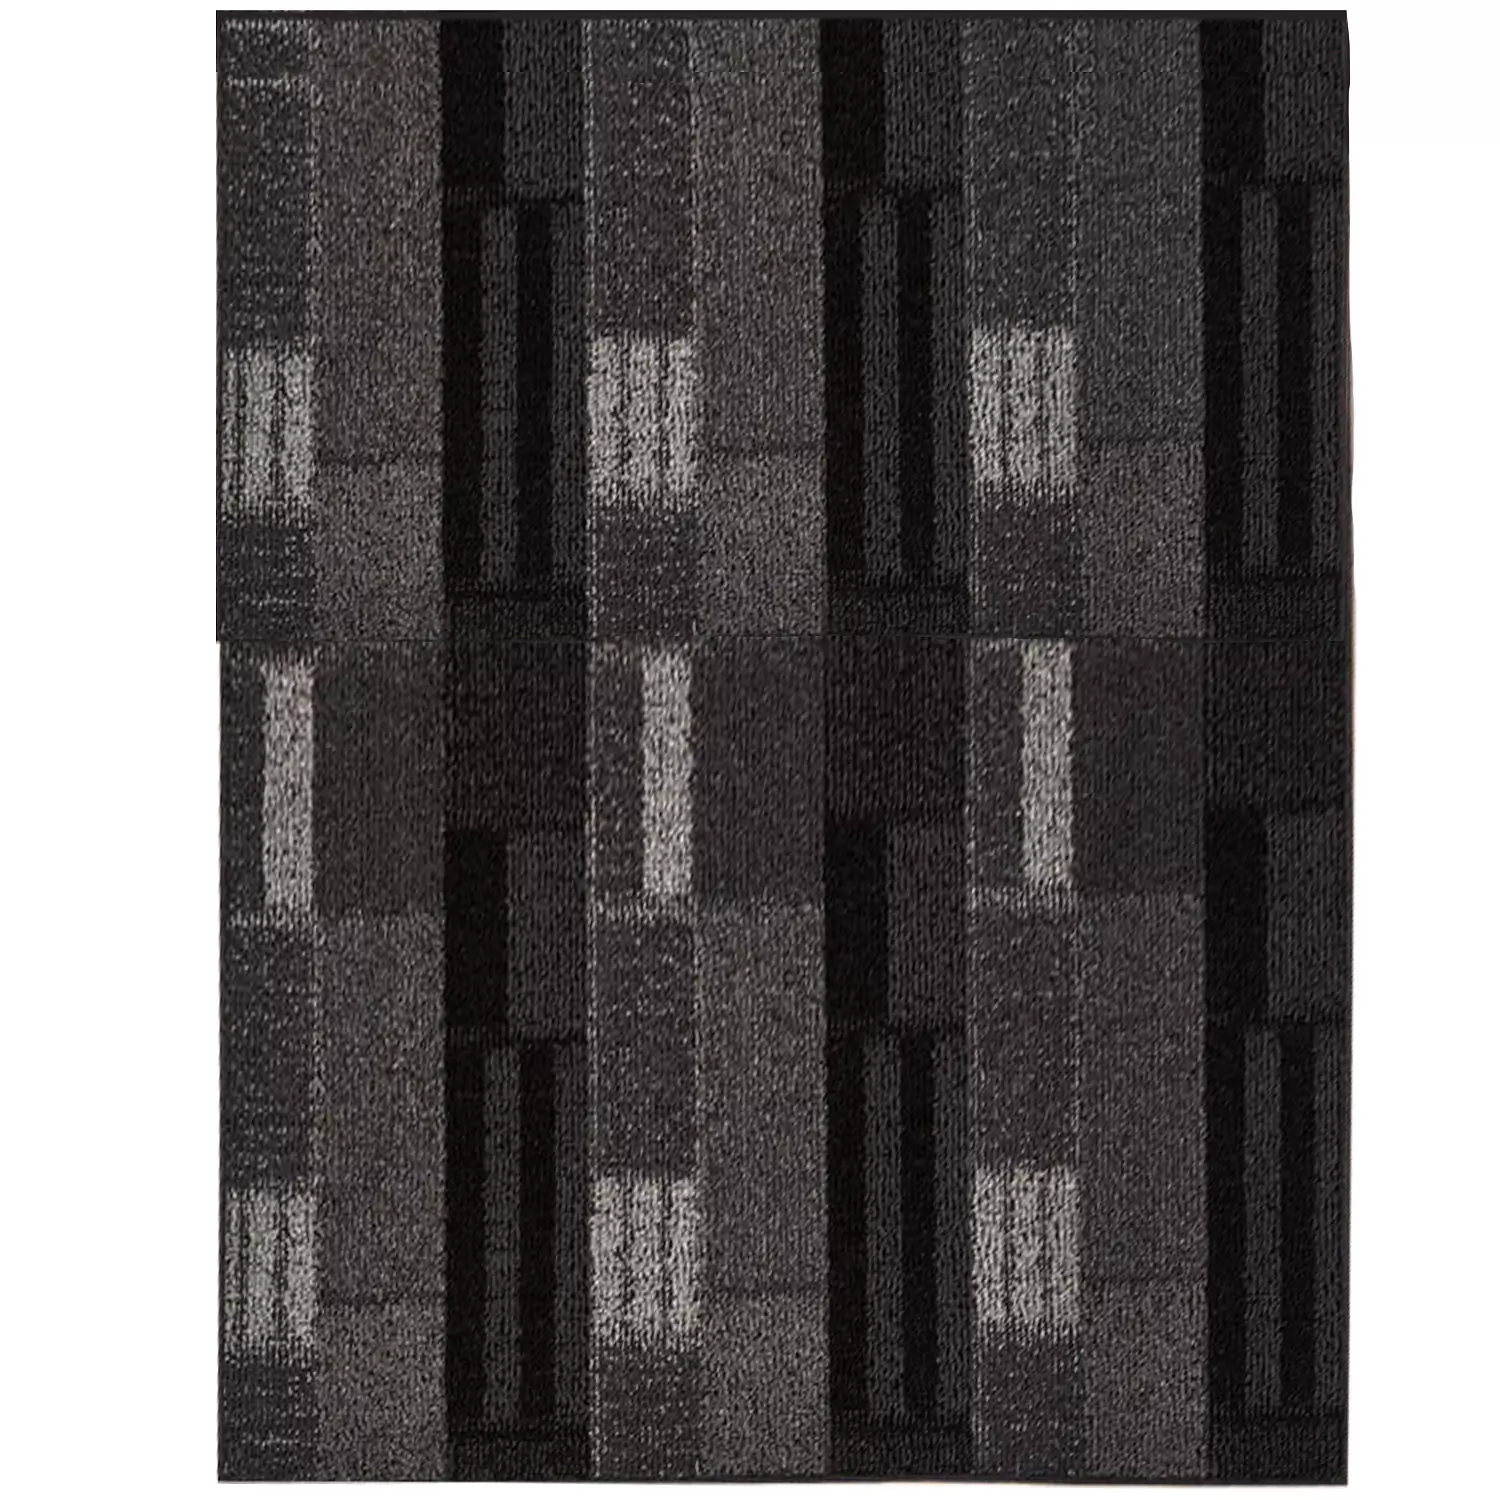 OCTAVE Collection - Charcoal rug, 2'x3'